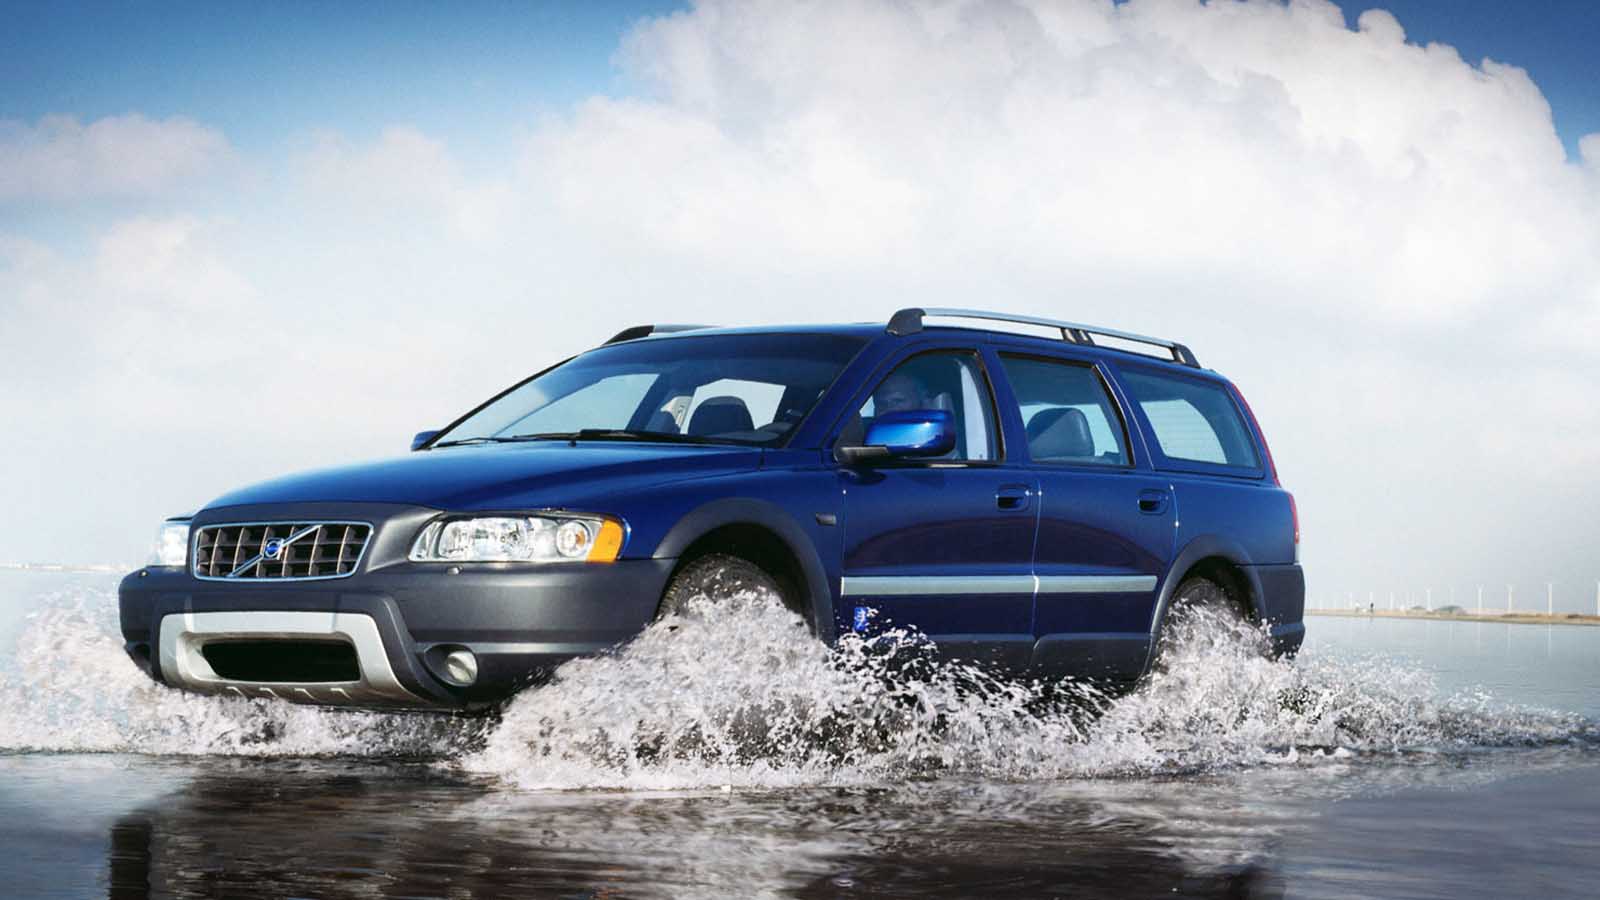 Volvo XC70 Ocean Race Edition 2006 | Specs and facts | DNA Collectibles